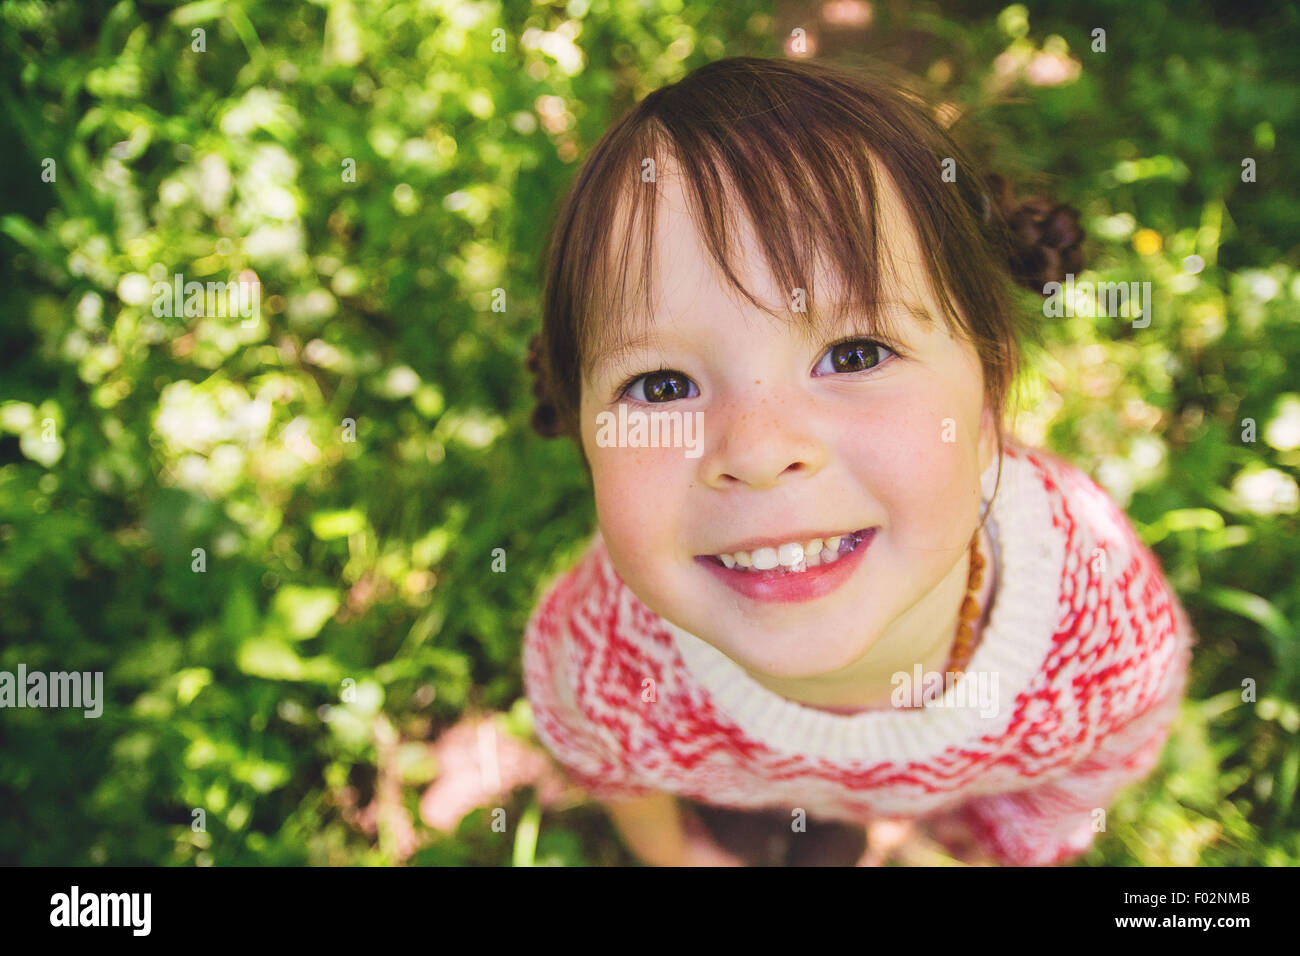 Smiling girl looking up Stock Photo